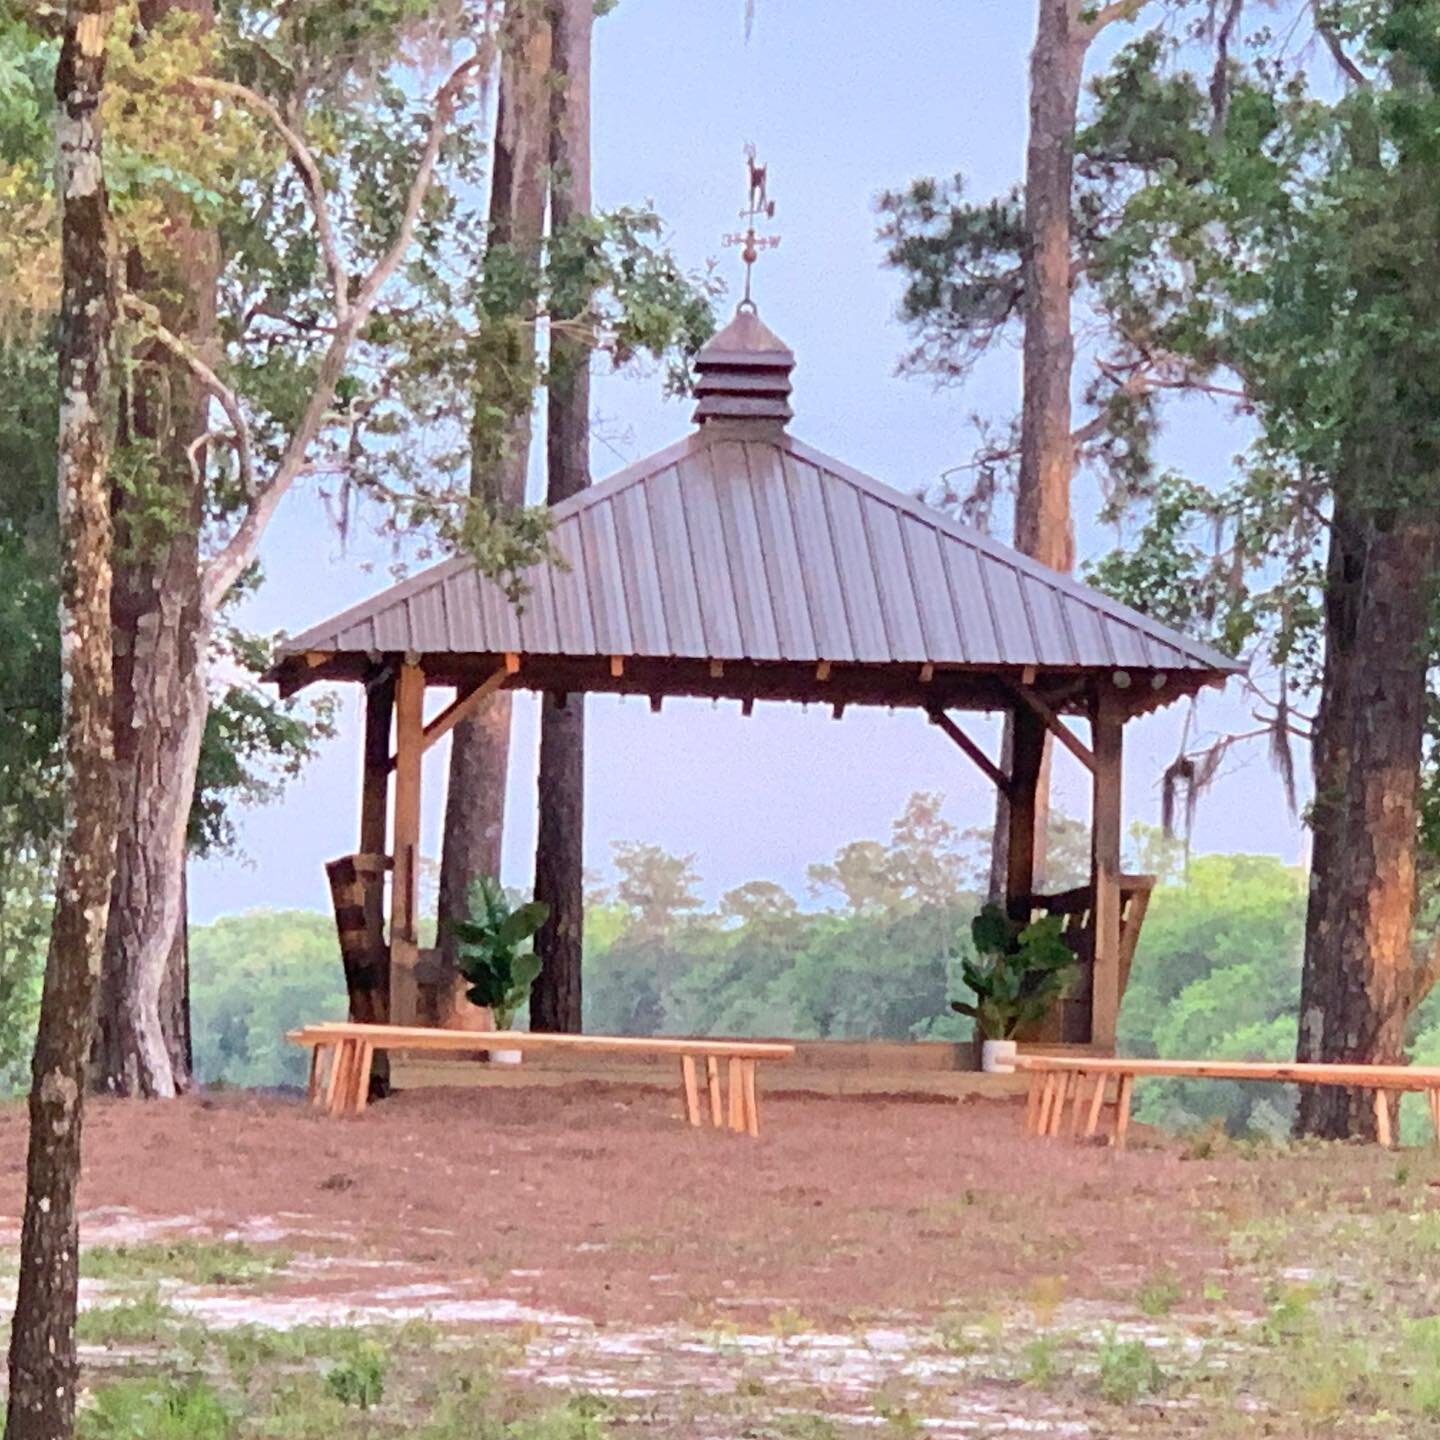 Swipe to see the beautiful Satilla River. View from the gazebo 😍